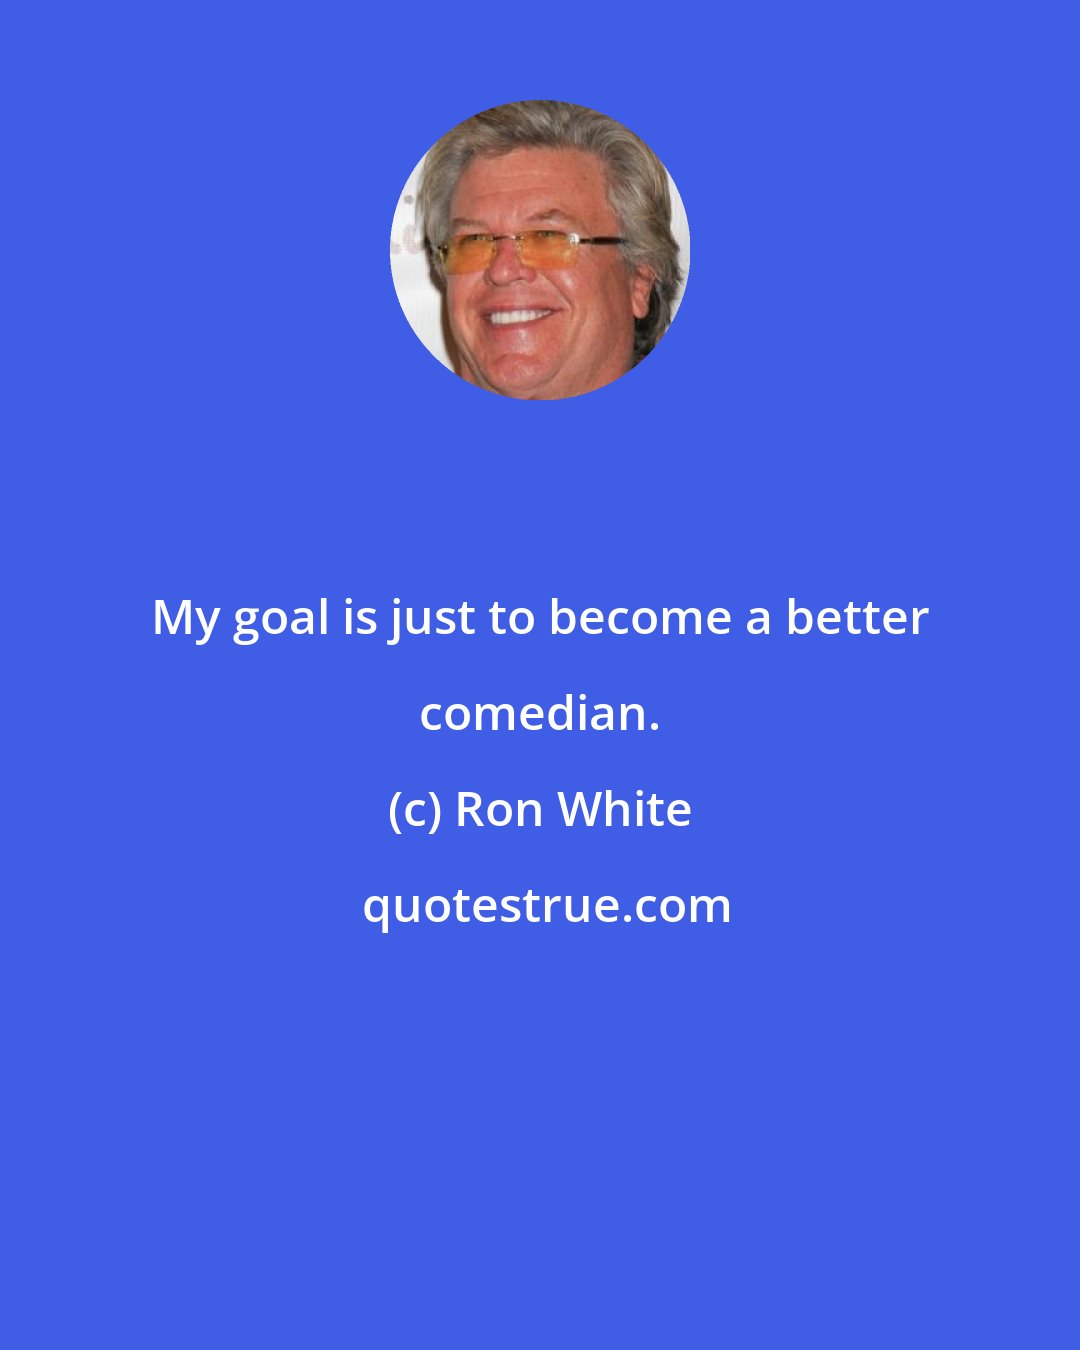 Ron White: My goal is just to become a better comedian.